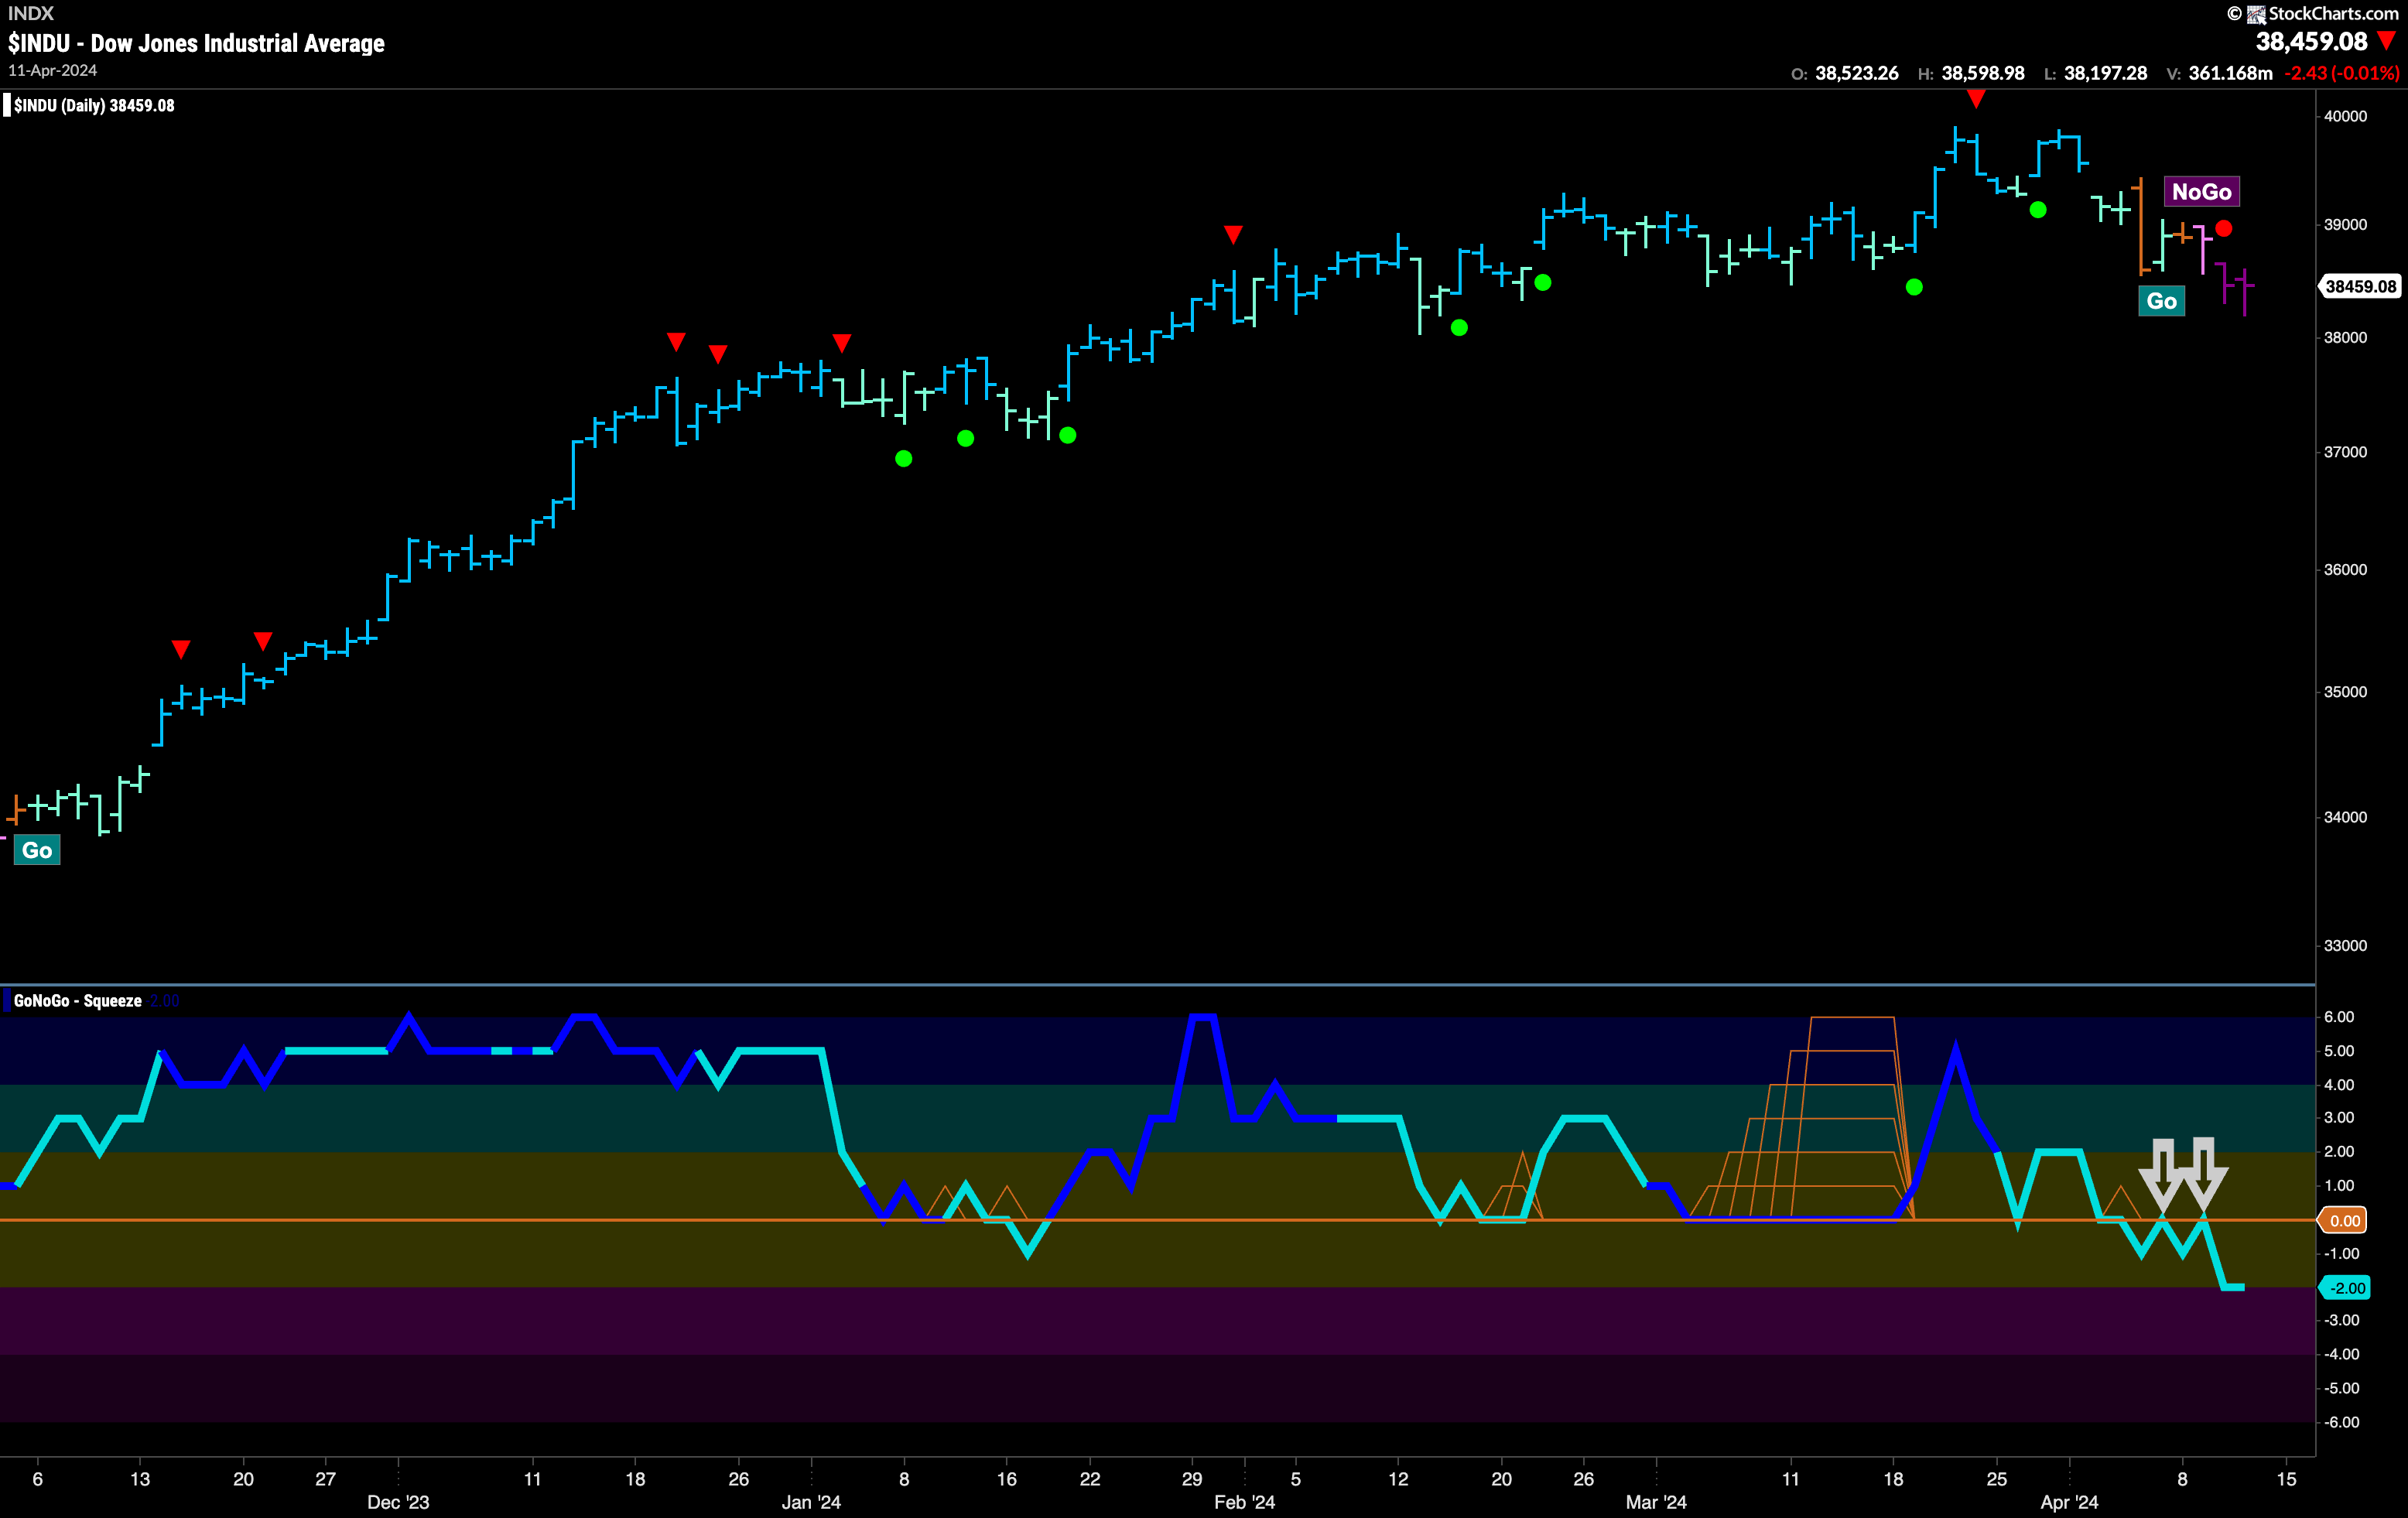 $INDU Sees Momentum Surge in Direction of New “NoGo” Trend